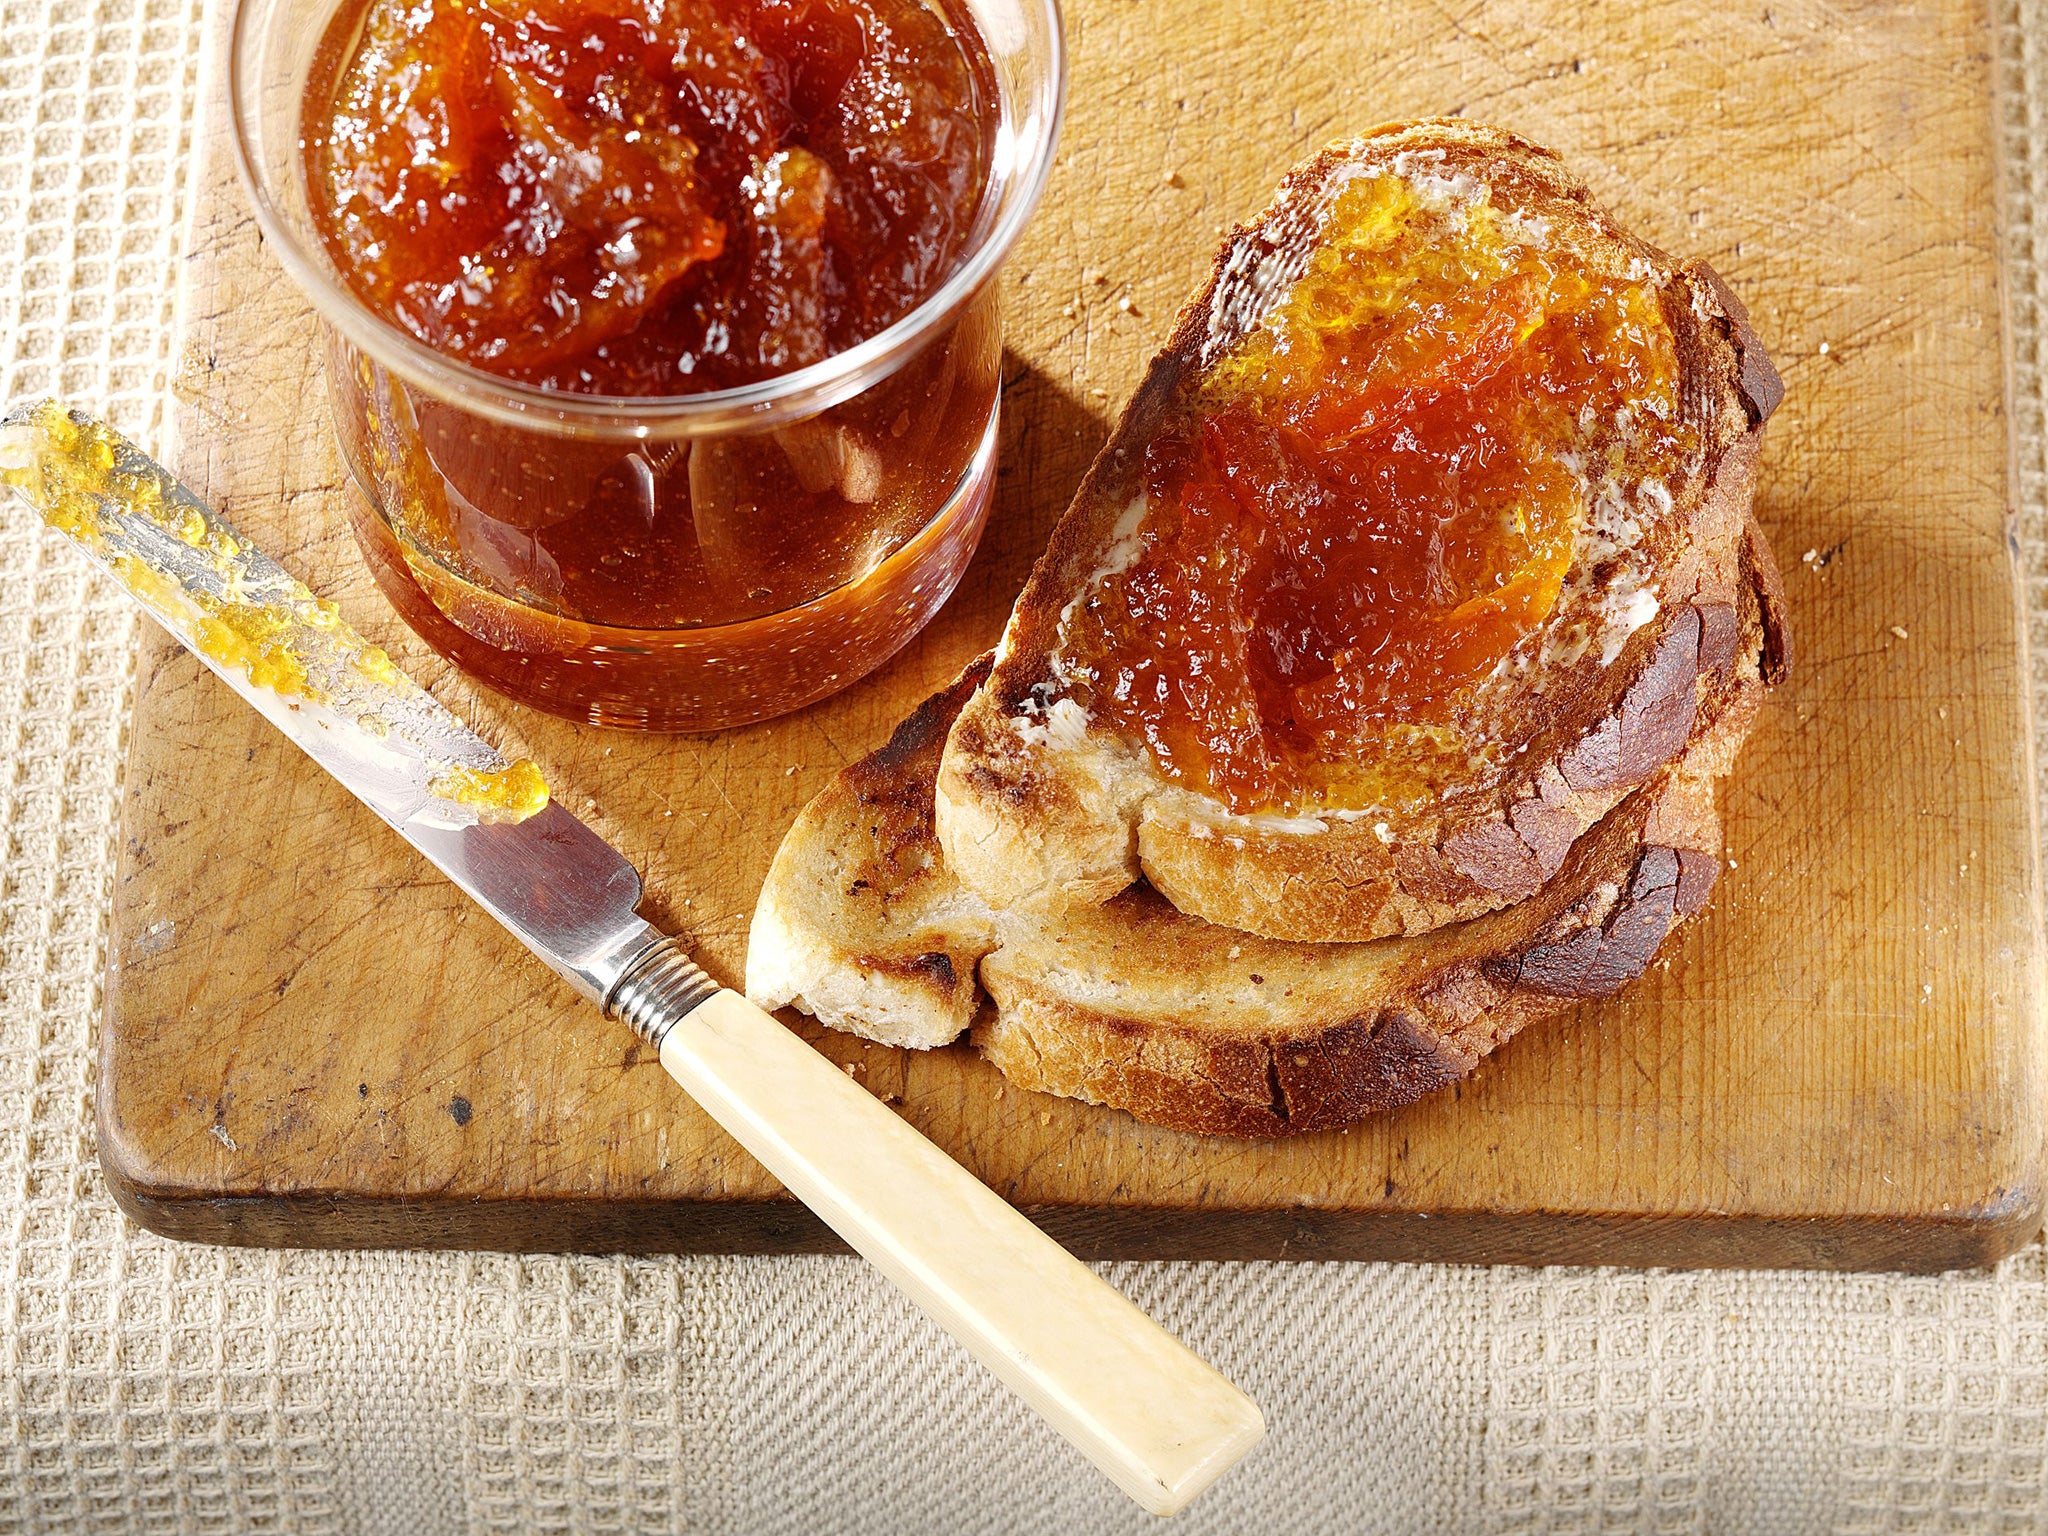 Honestly, who turns down marmalade?